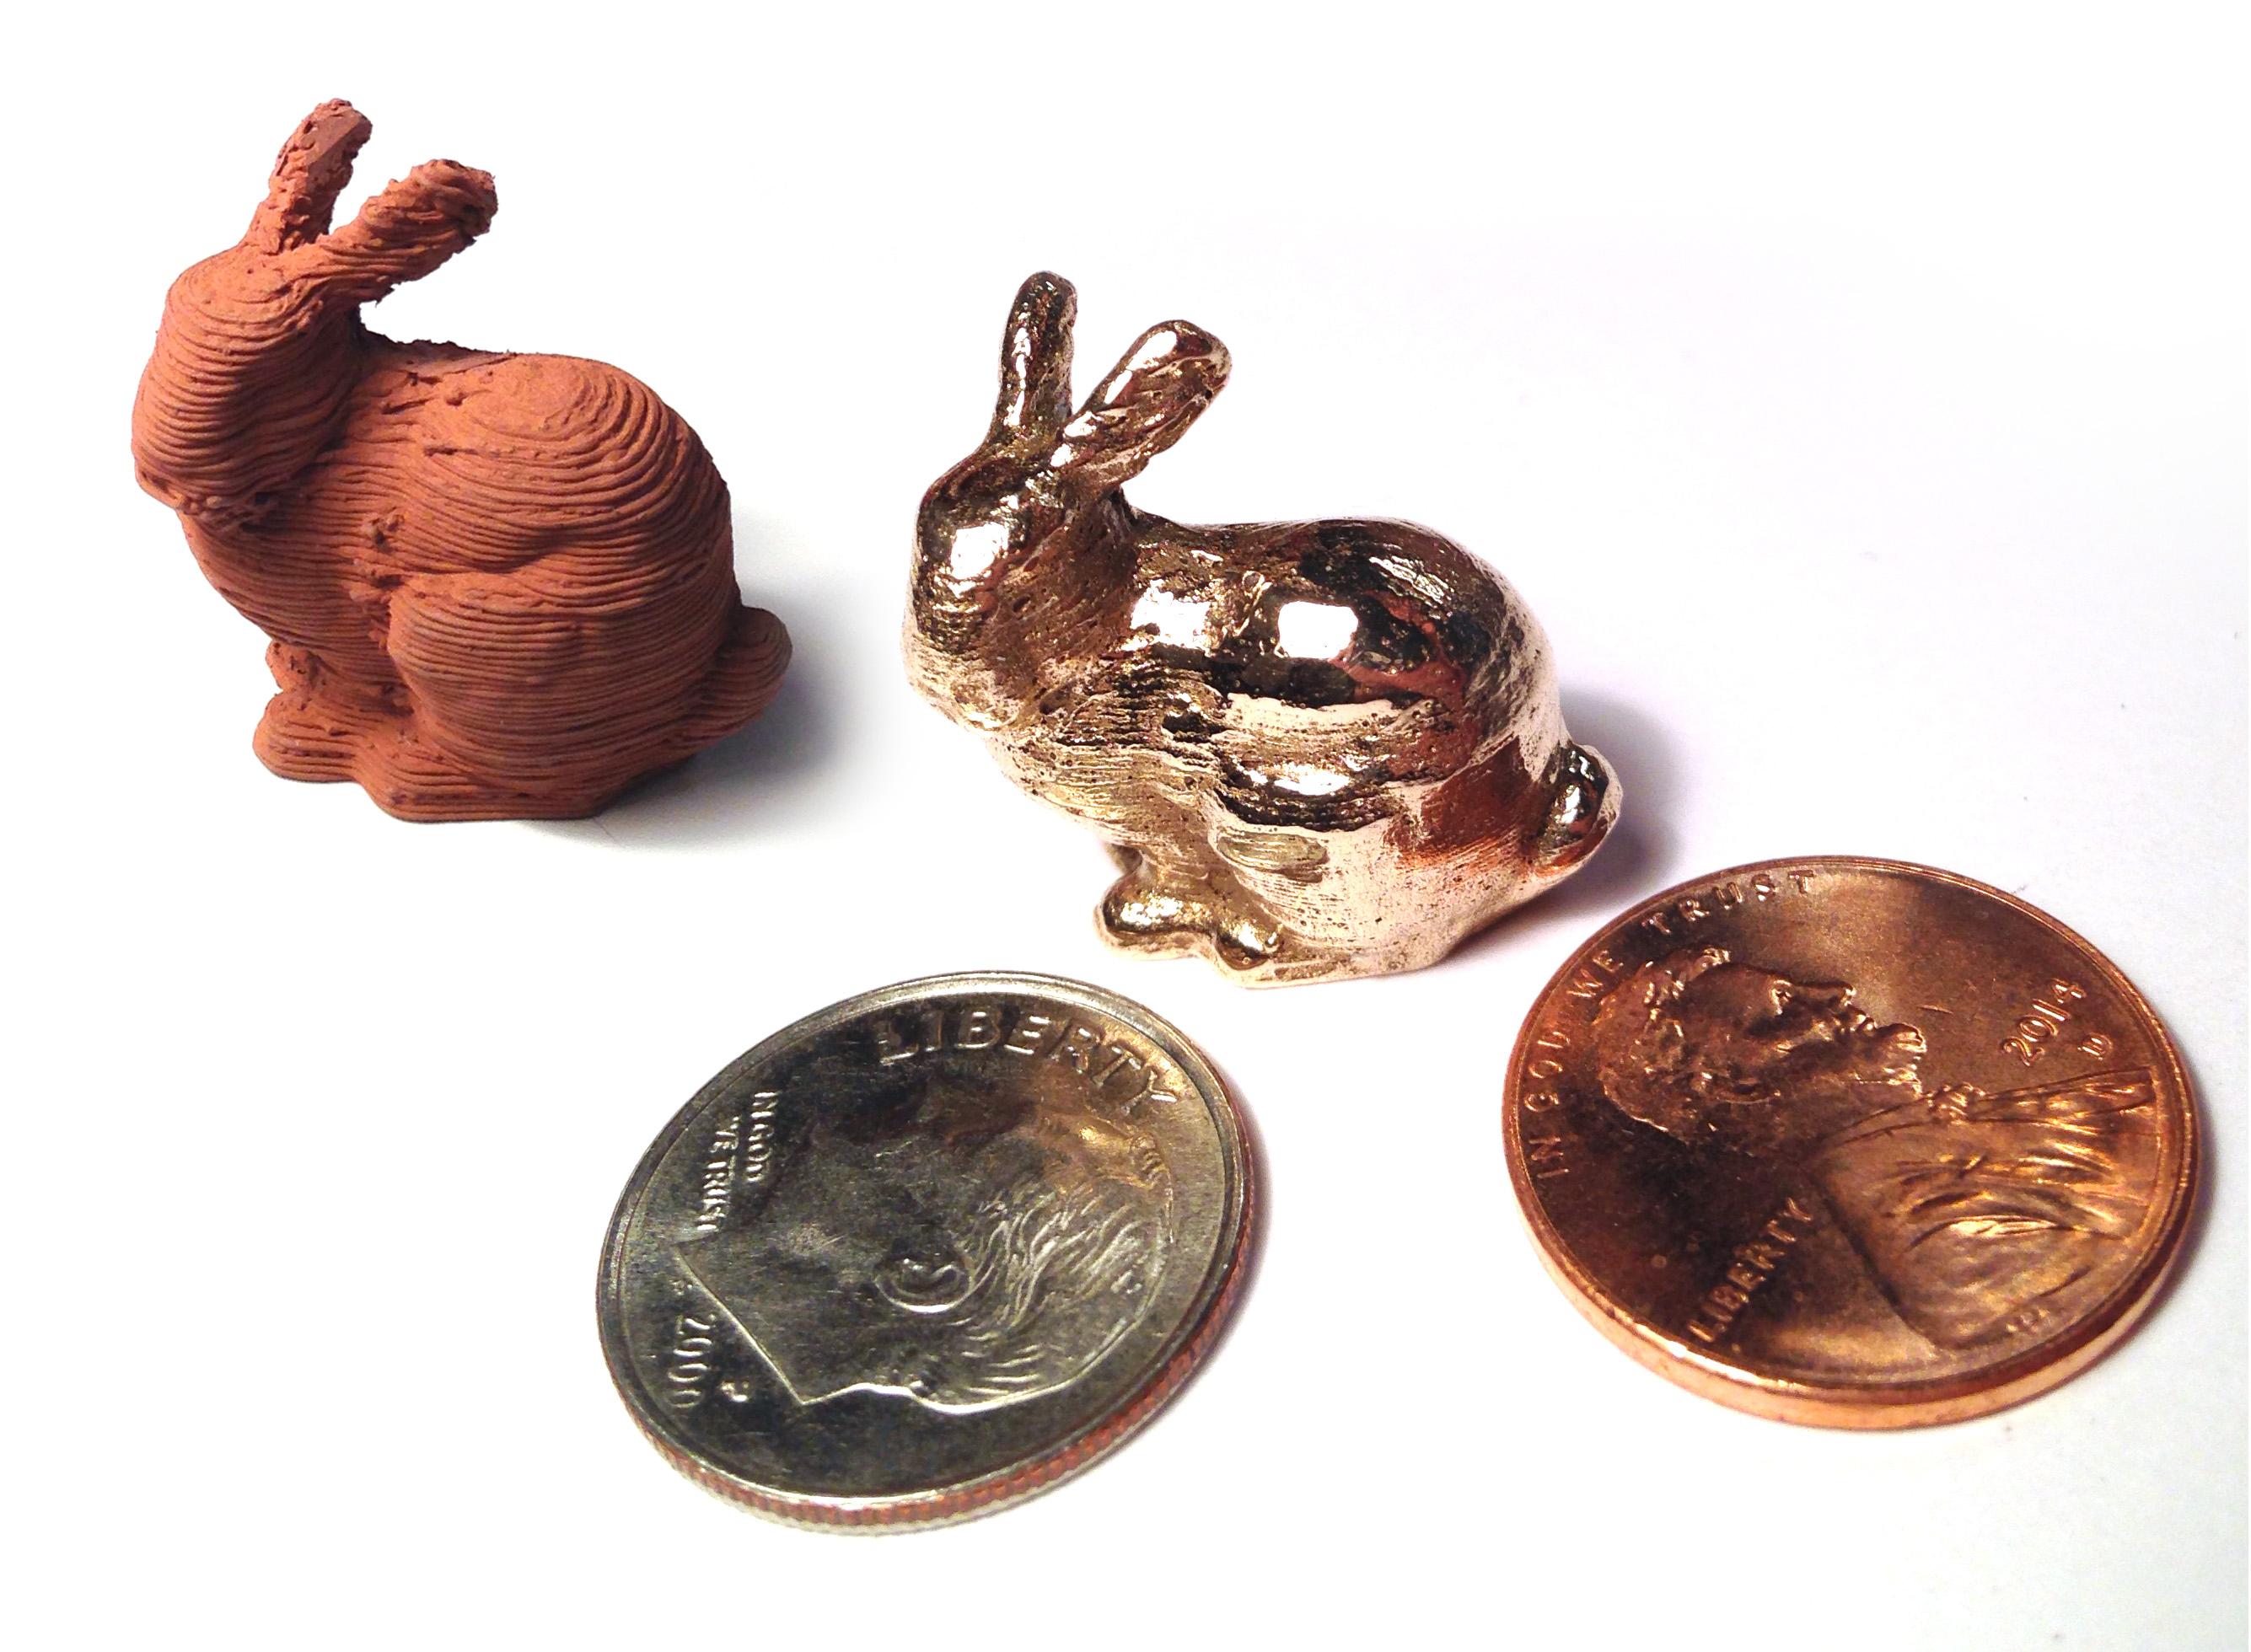 Build your own Mini Metal Maker: 3D print with metal clay, ceramic,  chocolate, stem cells, or whatever!